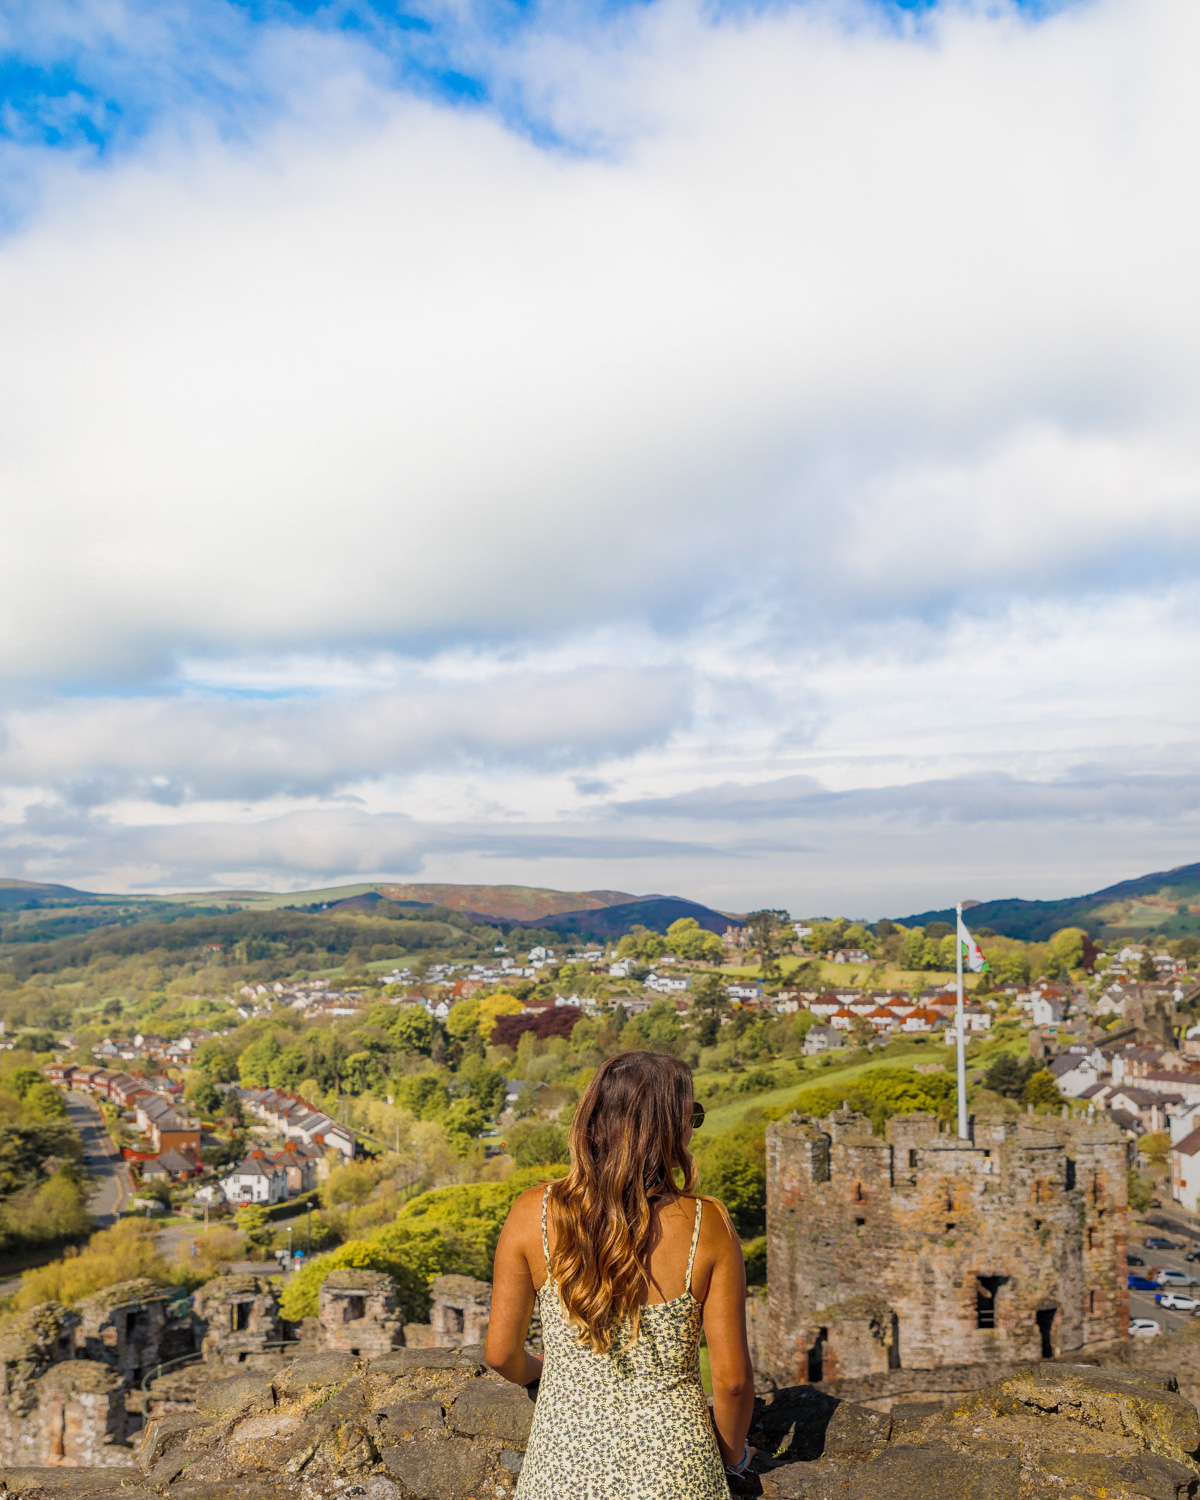 Conwy Castle // The Most Beautiful Places to Visit in Wales // #readysetjetset #wales #uk #welsh #travel #photospots #blogpost